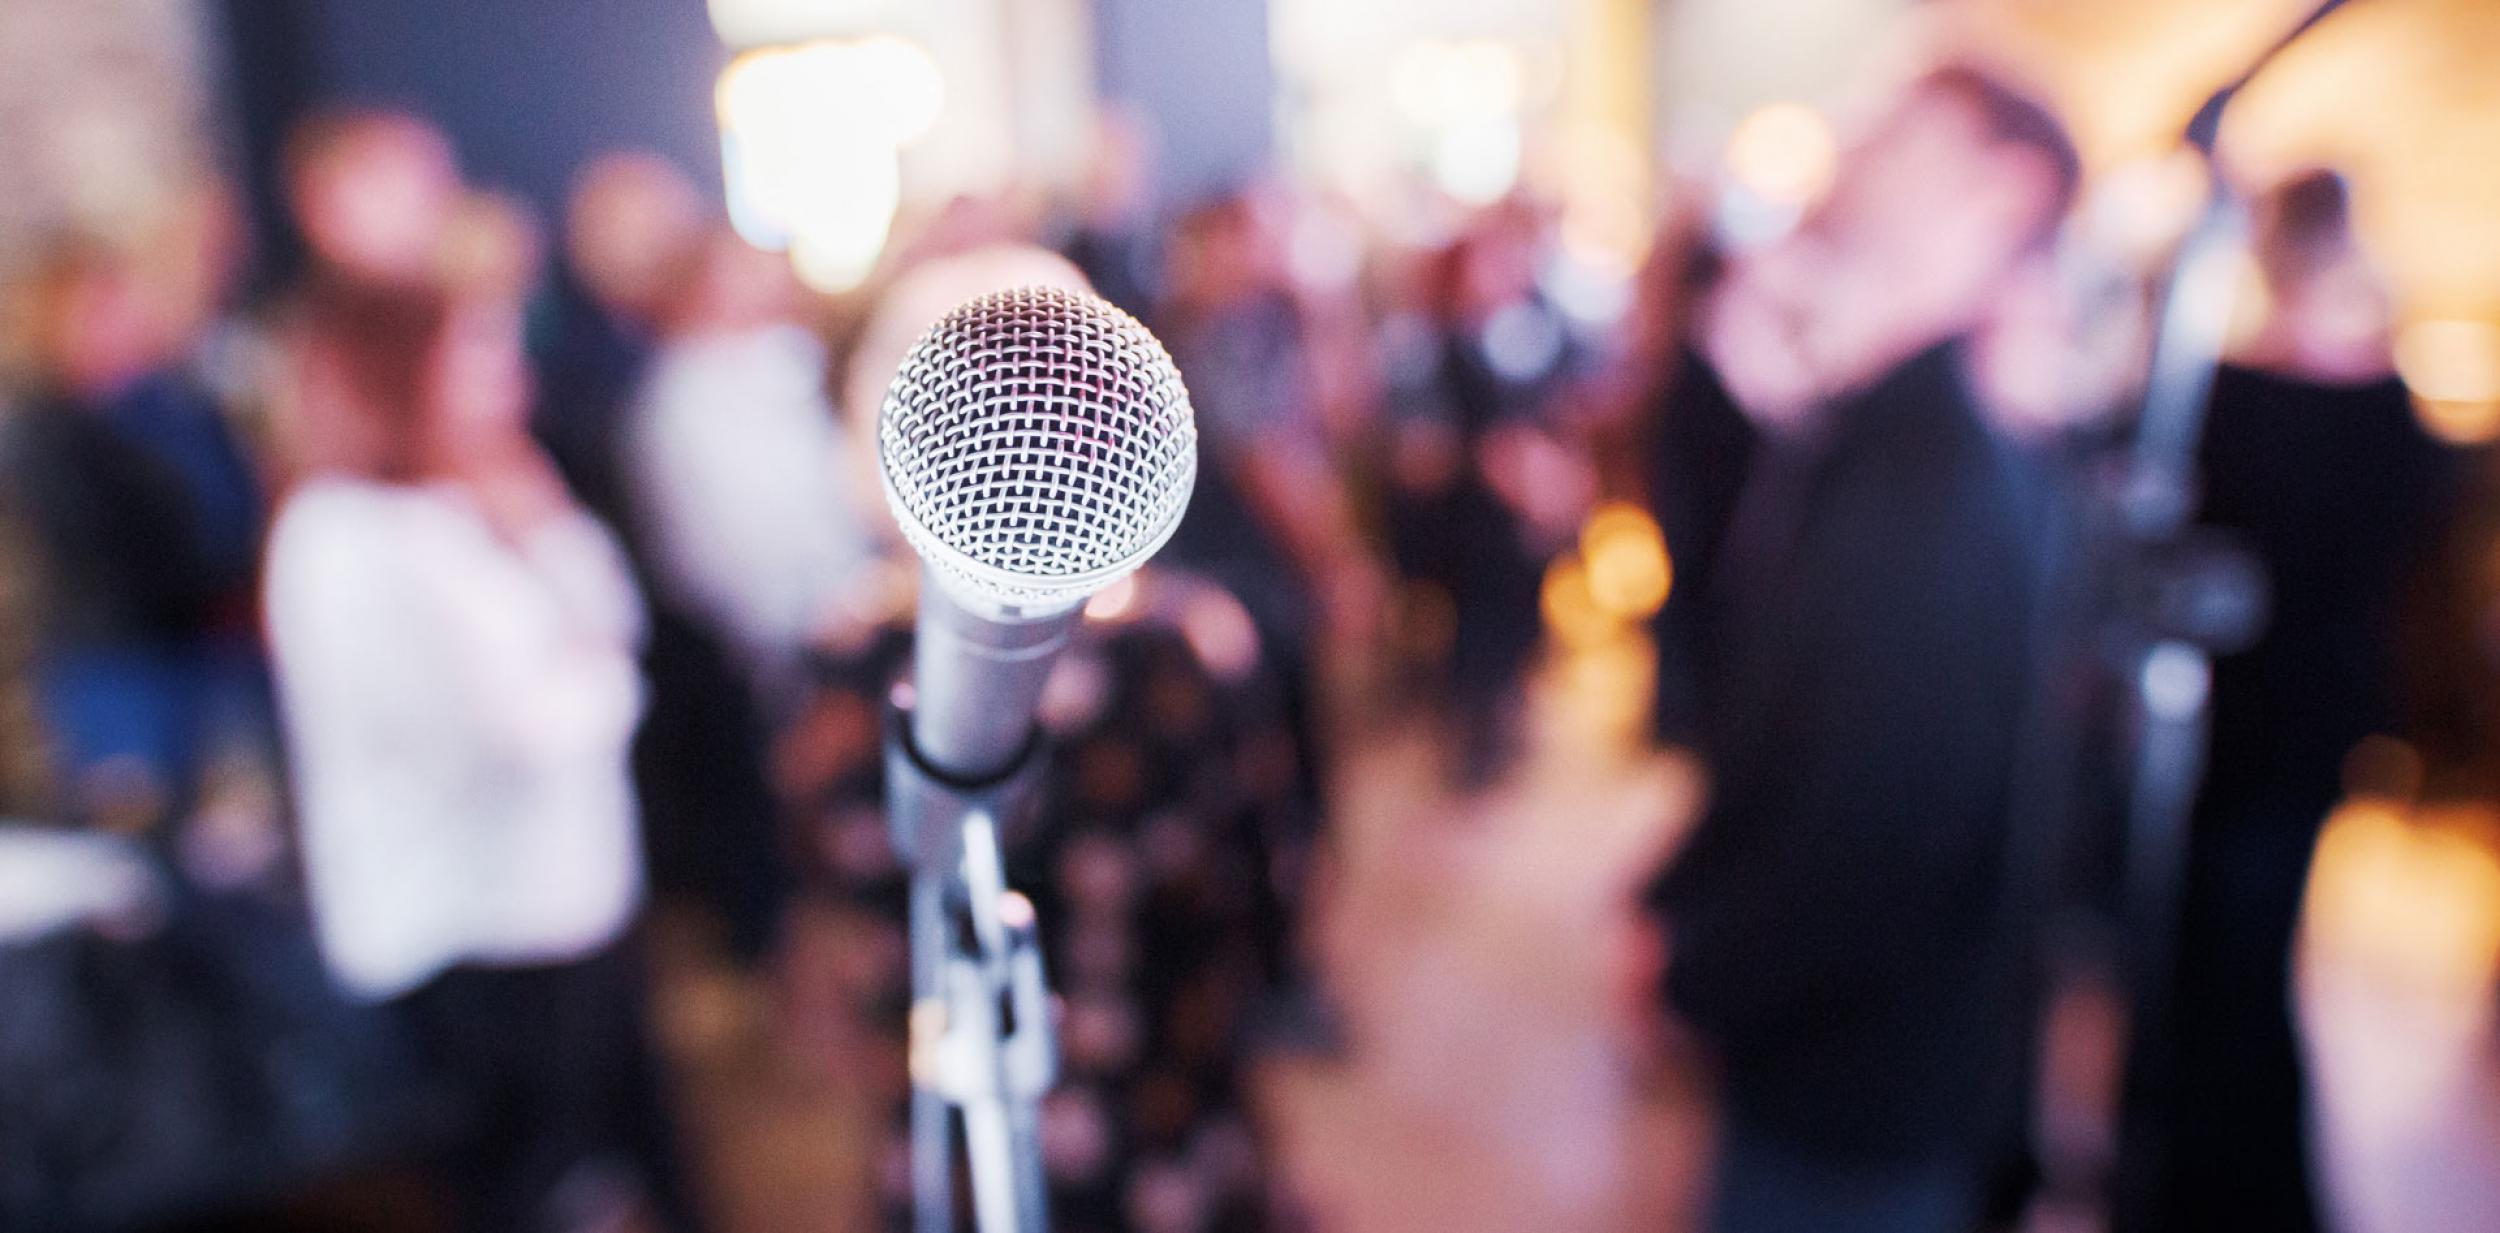 A microphone on a stand with a crowd of people behind it.